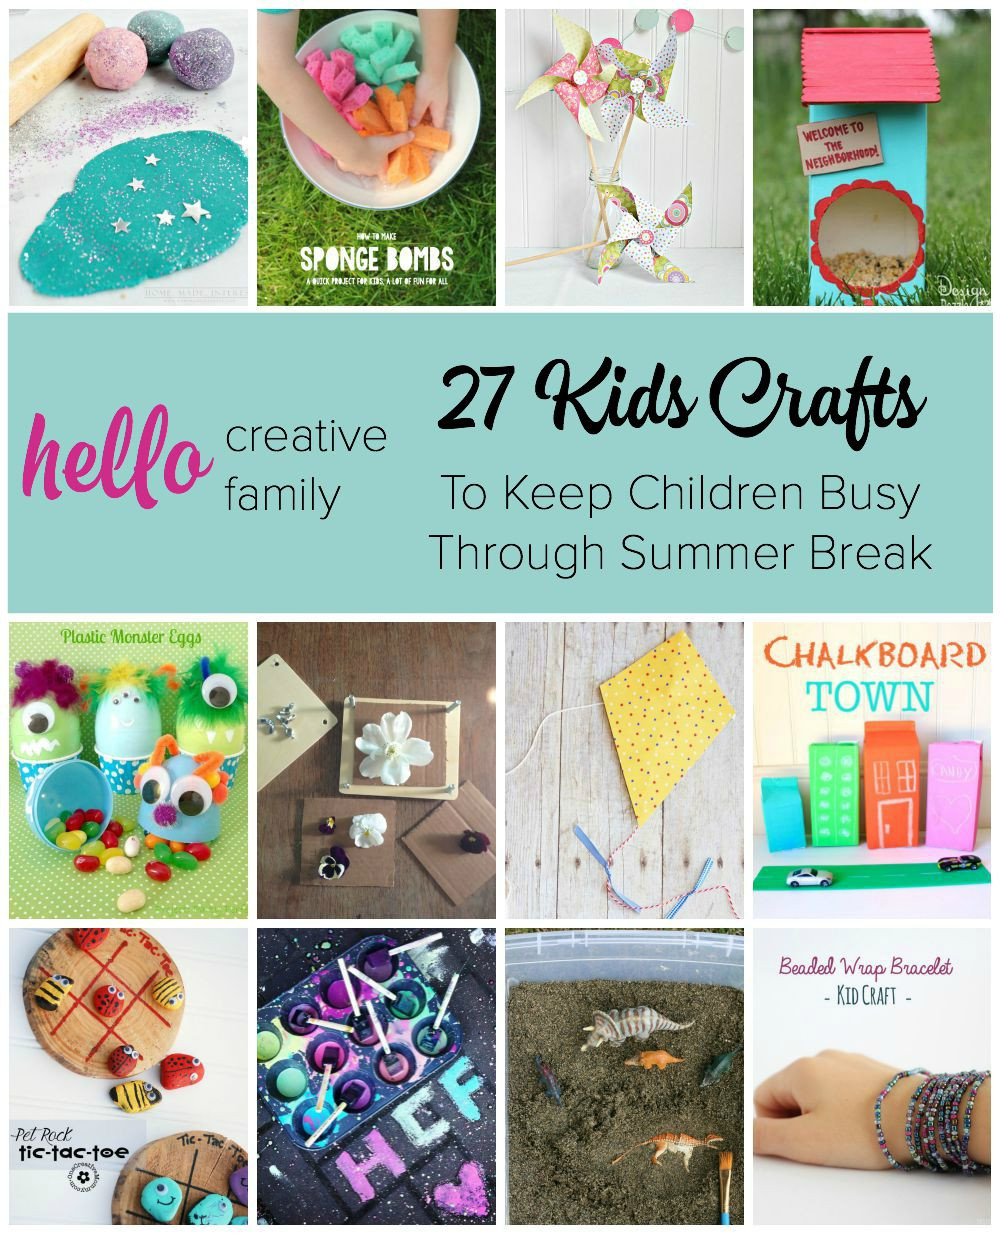 Creative Projects For Kids
 27 Kids Crafts and DIY Projects For Summer